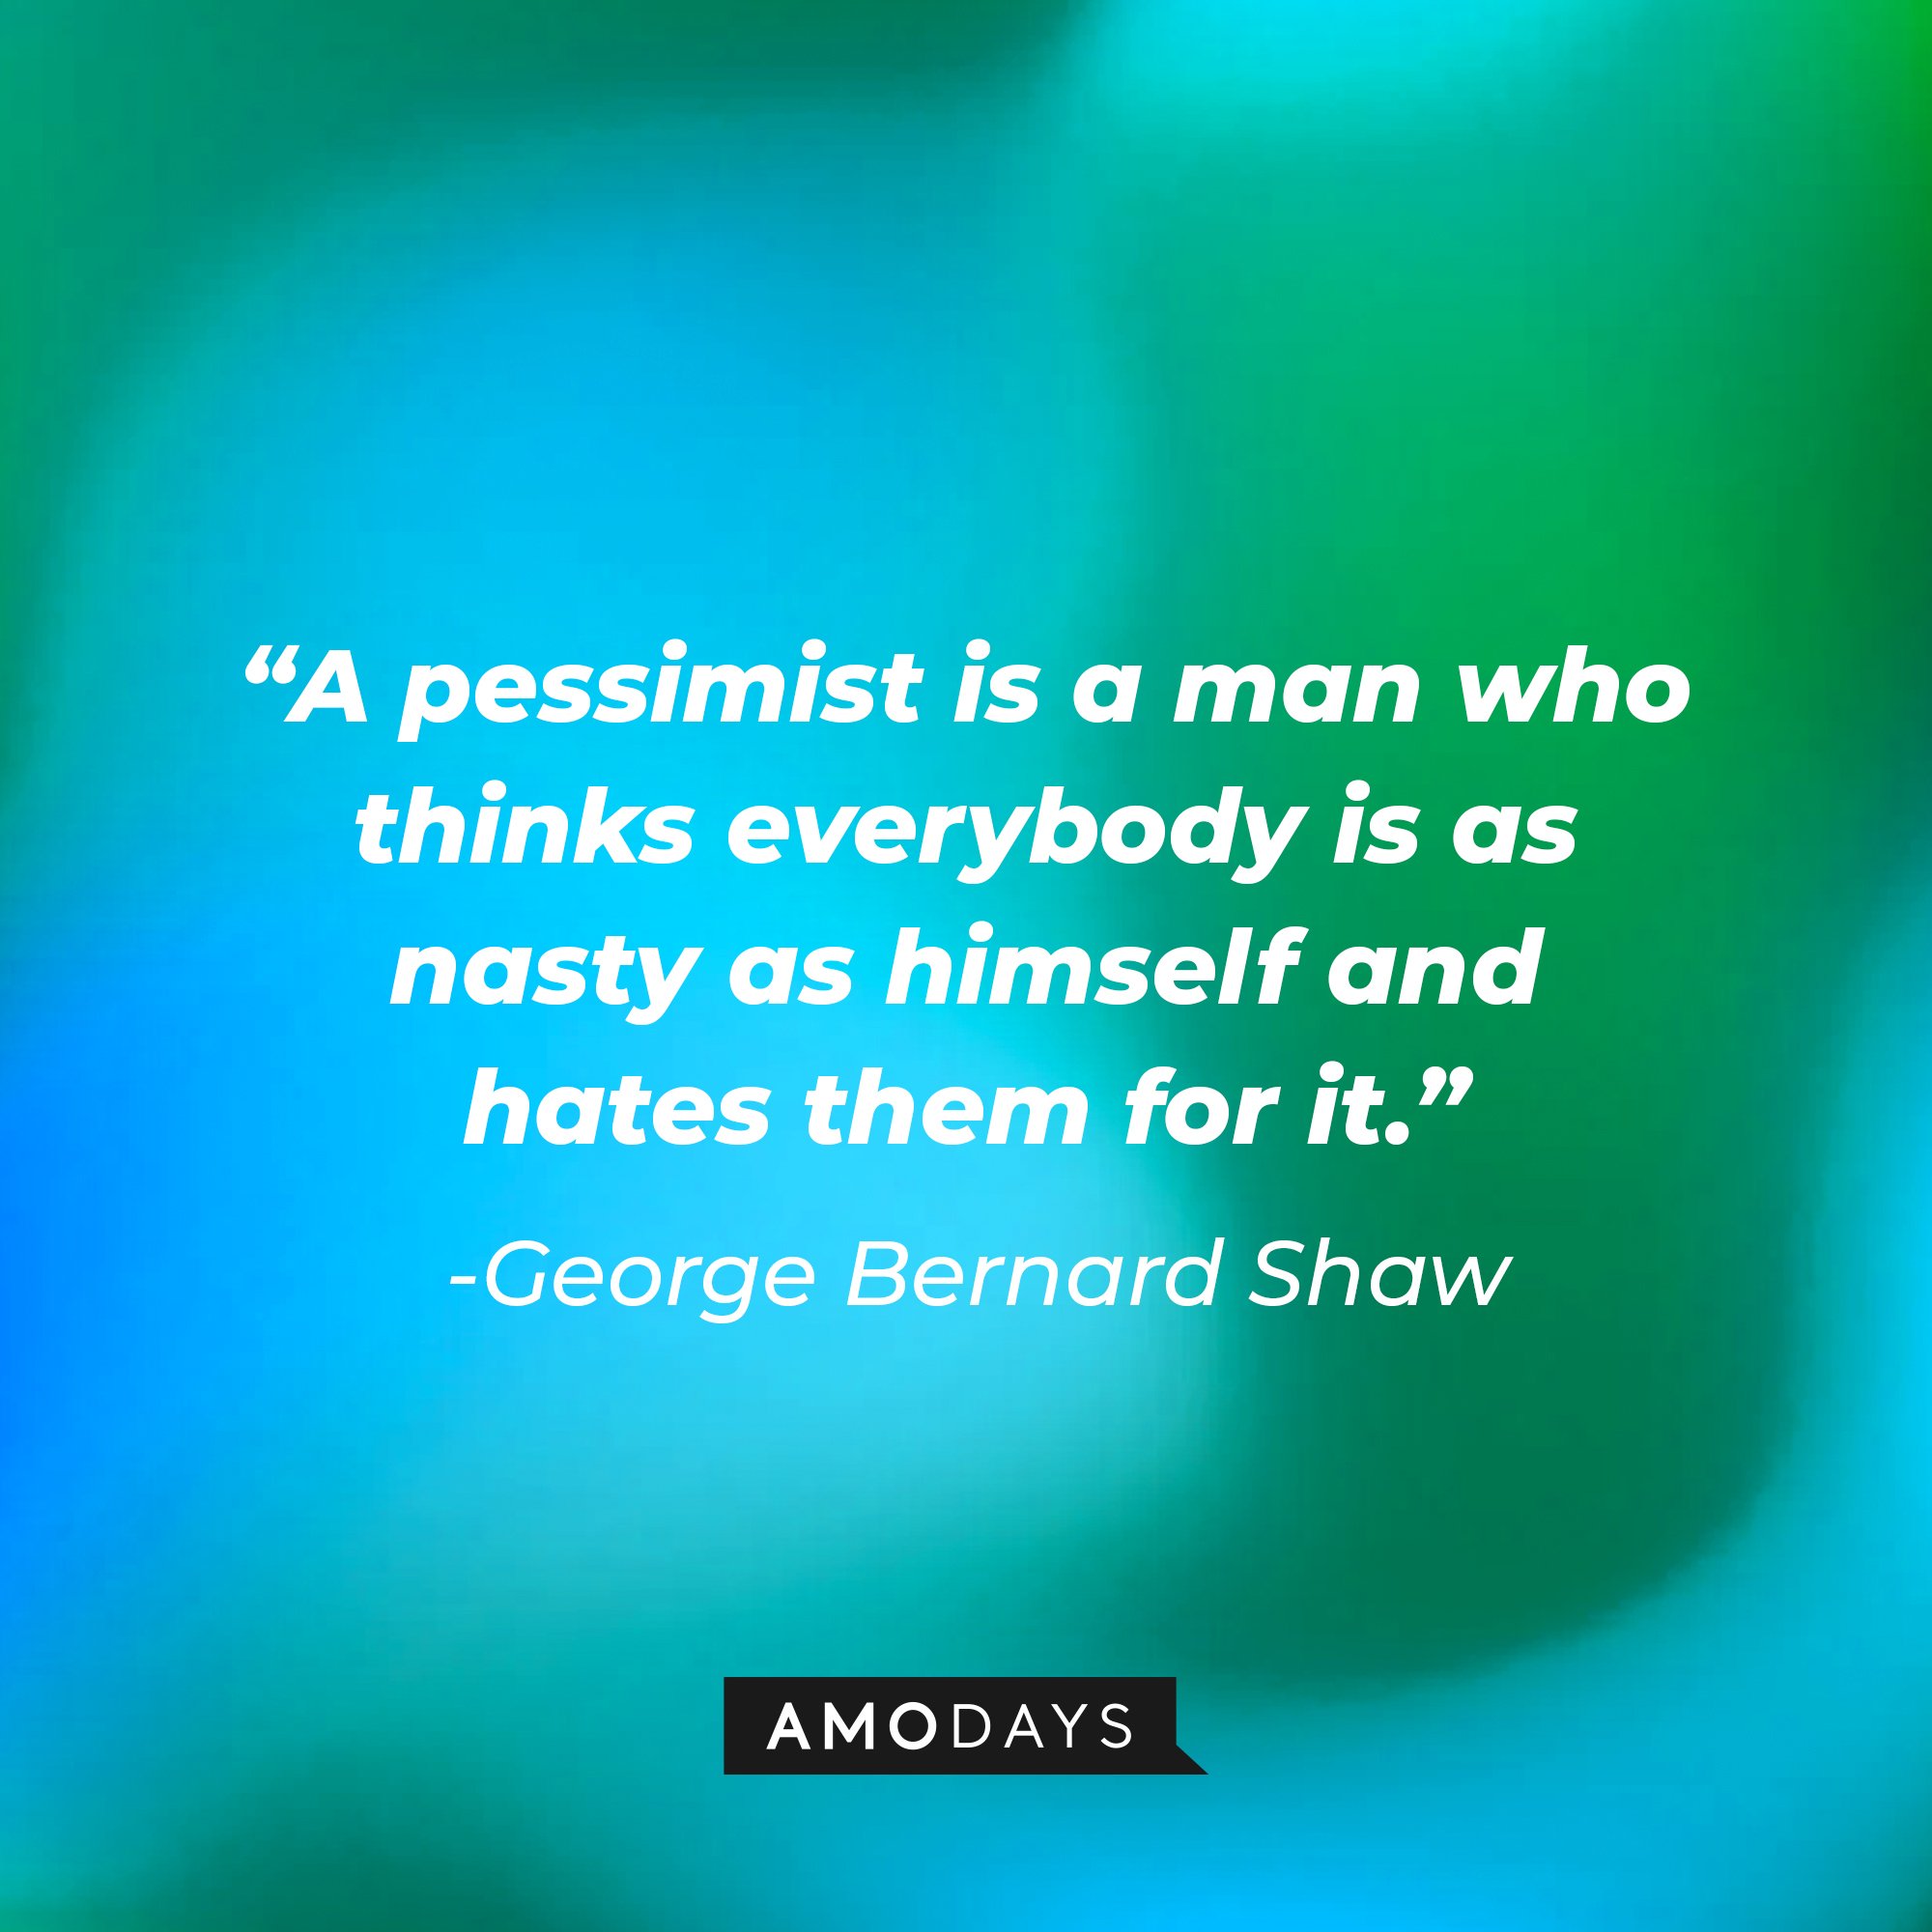 George Bernard Shaw’s quote: "A pessimist is a man who thinks everybody is as nasty as himself and hates them for it." | Image: AmoDays 